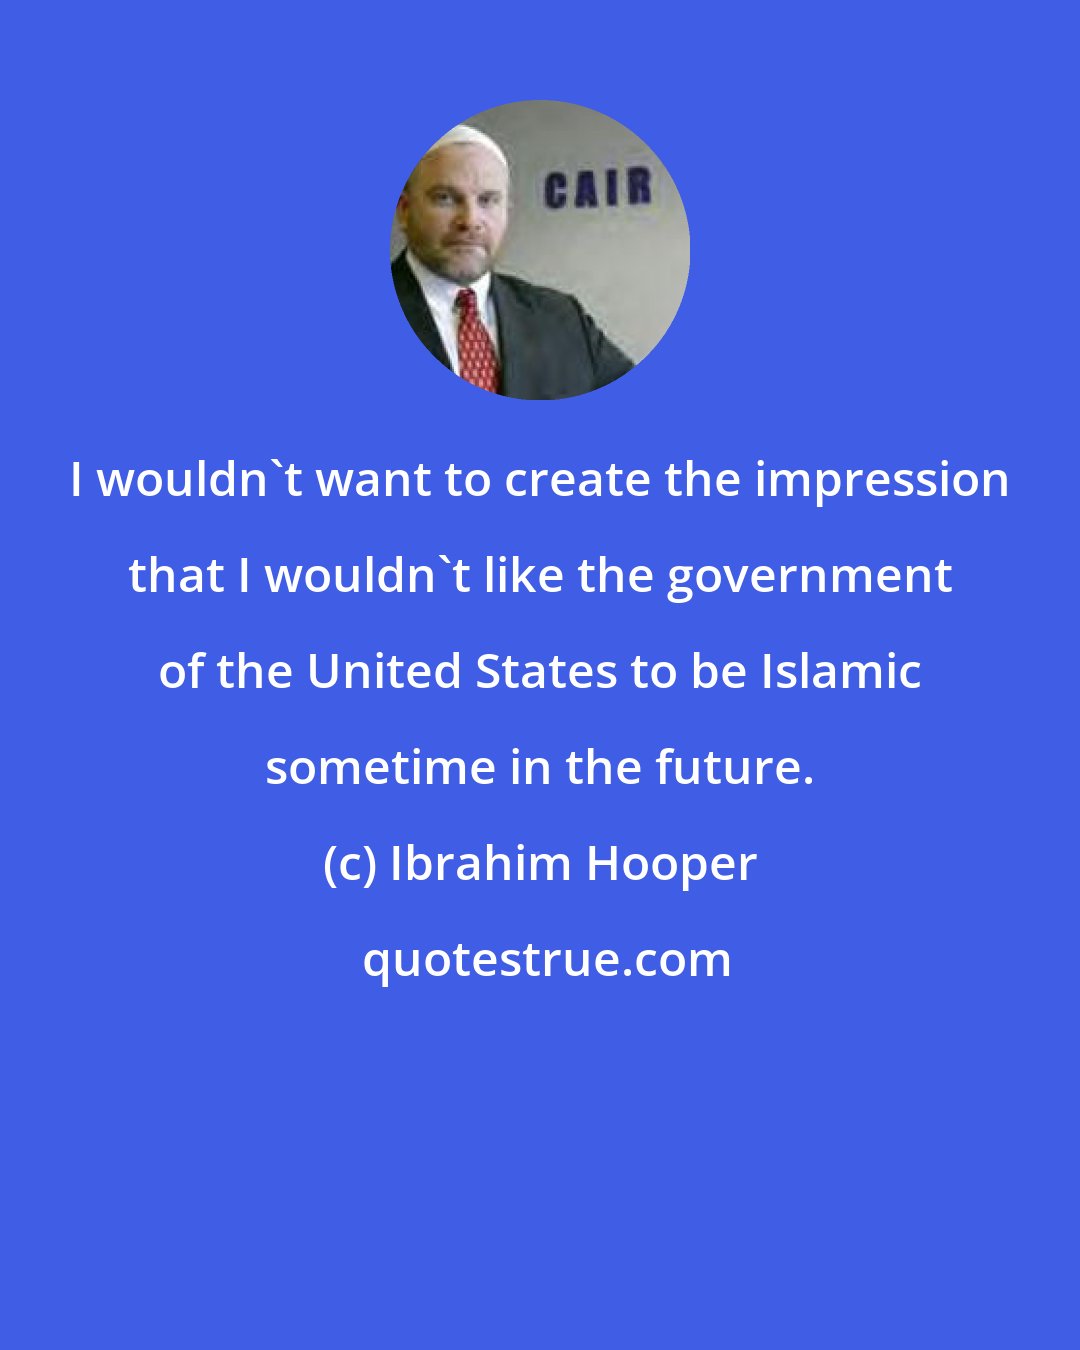 Ibrahim Hooper: I wouldn't want to create the impression that I wouldn't like the government of the United States to be Islamic sometime in the future.